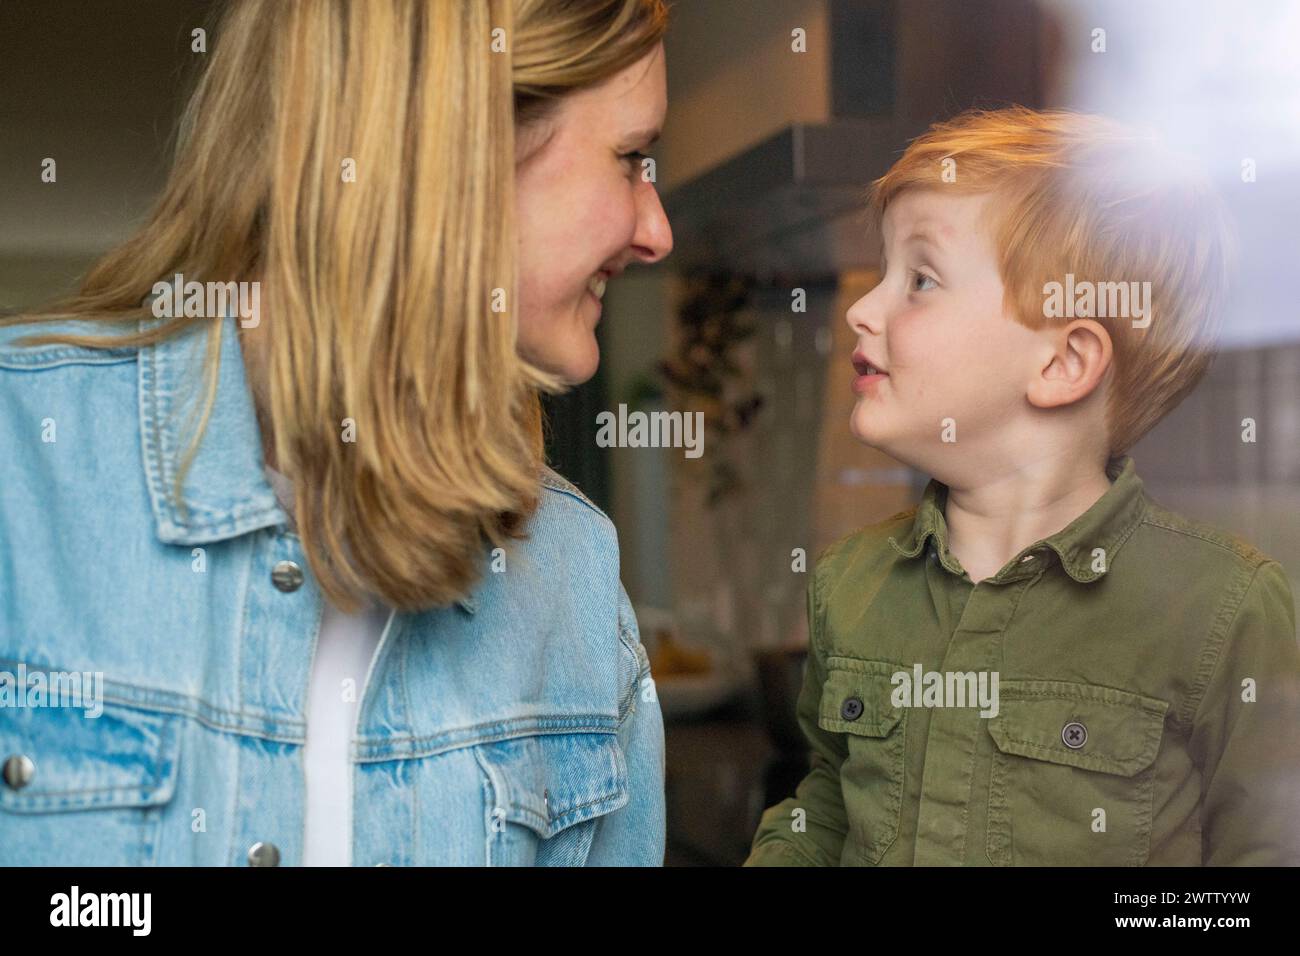 Heartwarming moment as a young boy gazes at his mother with love and curiosity. Stock Photo